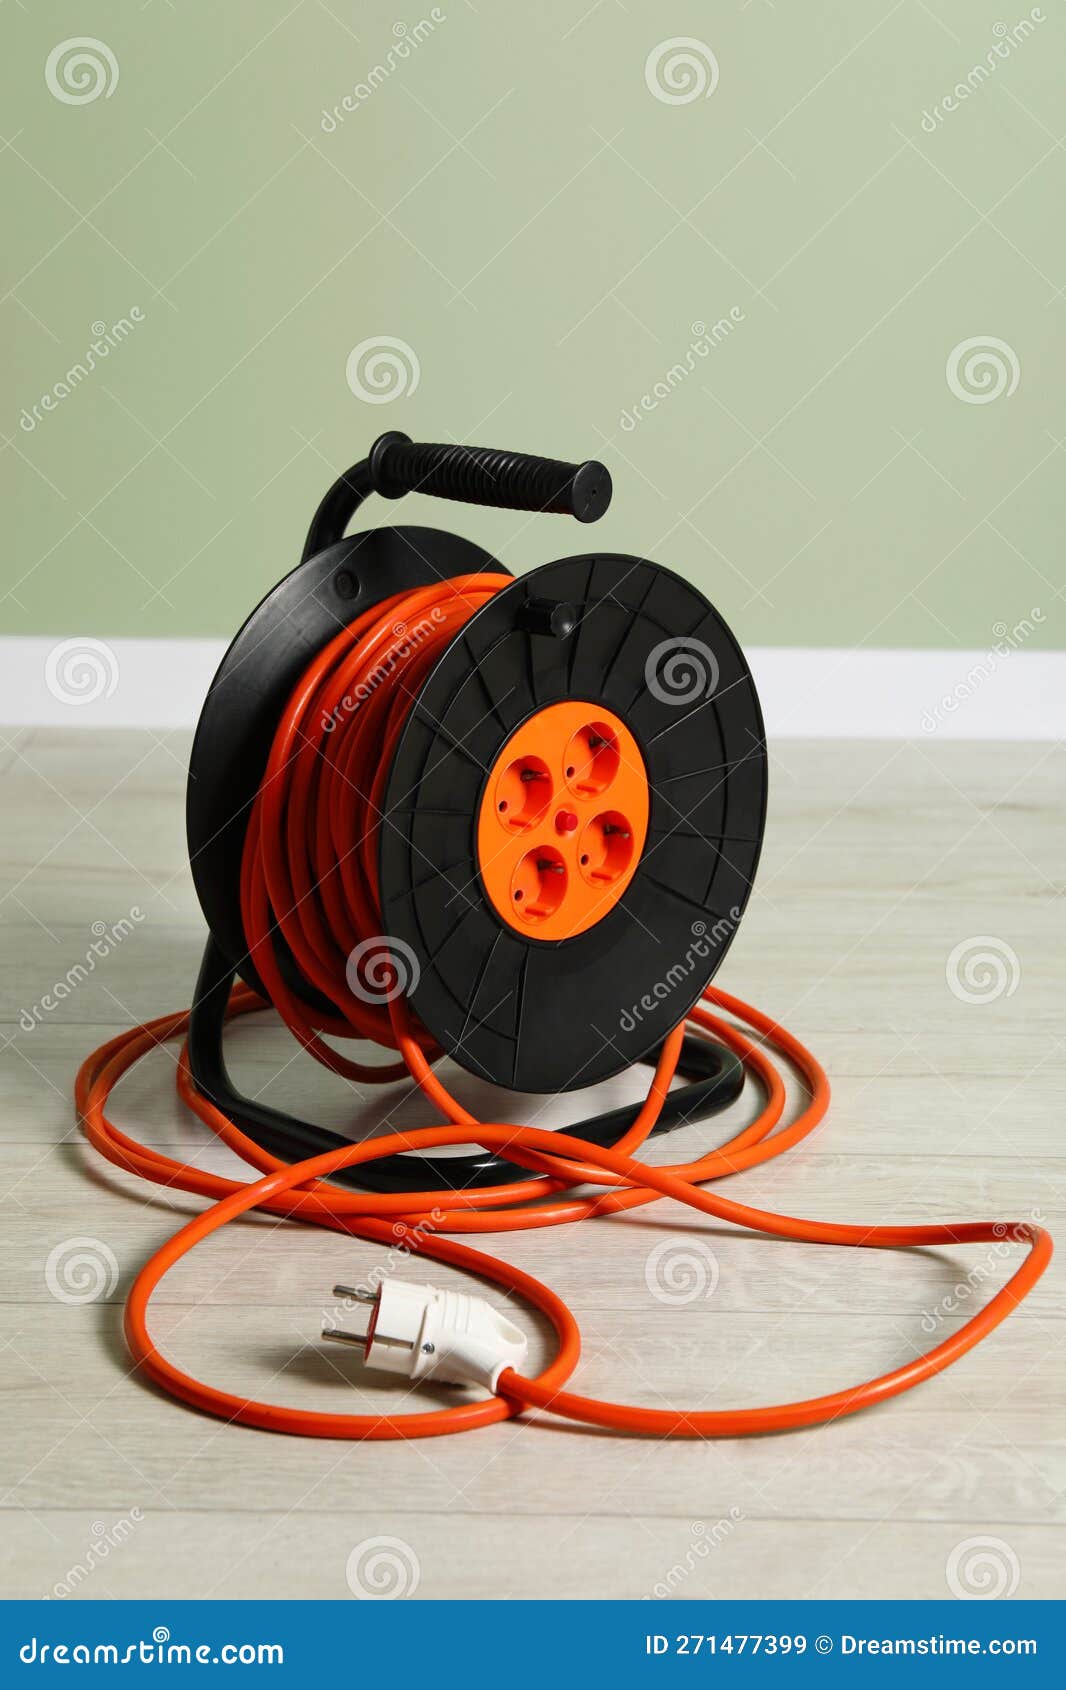 Extension Cord Reel on Floor Near Light Green Wall. Electrician S